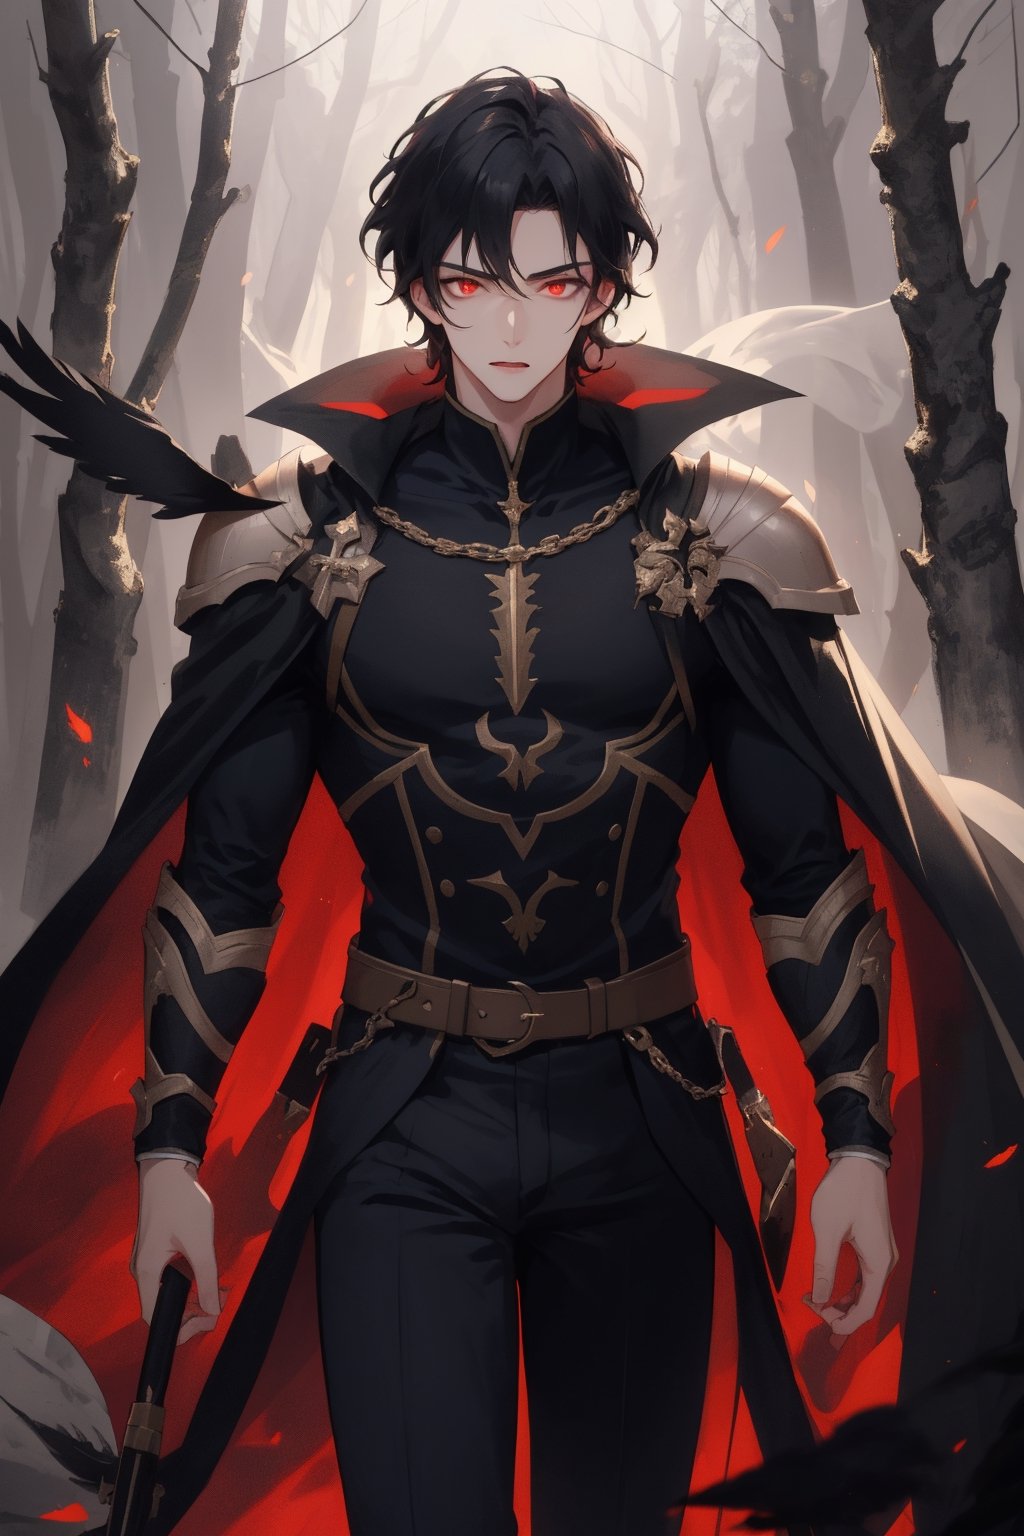 1man, young man,  25 years old,  short black hair,wavy hair,  glowing  red eyes, pale skin,  walking in a magical forest,  magical forest background,  day,  day light, wearing a scale armor,black feathers cape,  training,  challenger face,  fitness body,  piece teacher,  perfect face,  high quality,  American shot,  perfect face,  perfect hands,  muscular sensual body,  aesthetic and sensual body, Detailedface,1boy,wrenchftmfshn